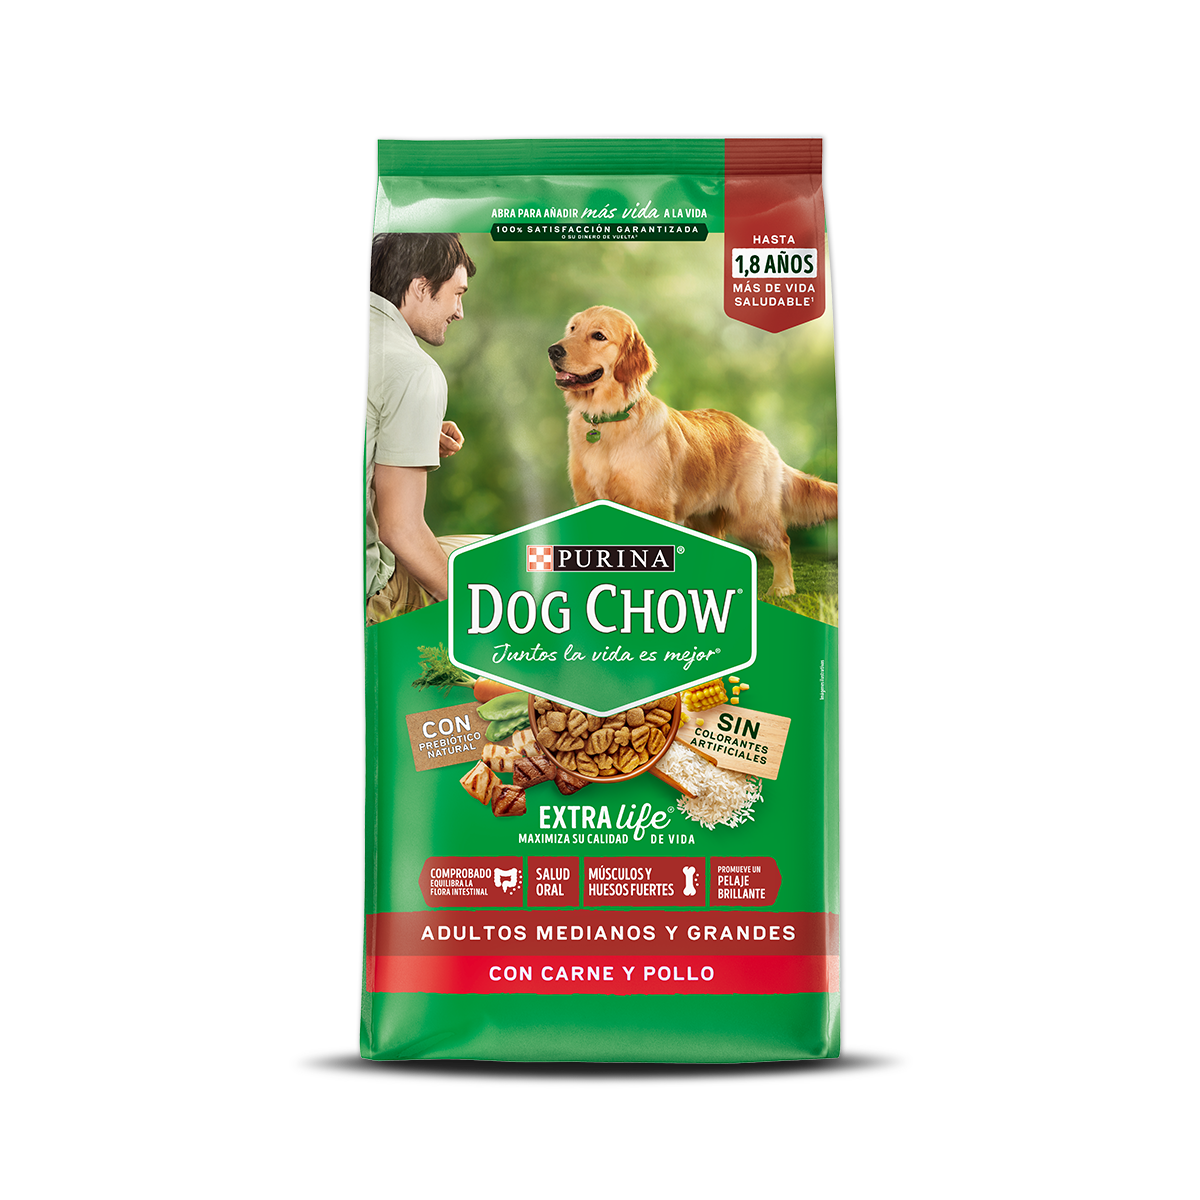 Purina-DogChow-adultos-colombia_0.png